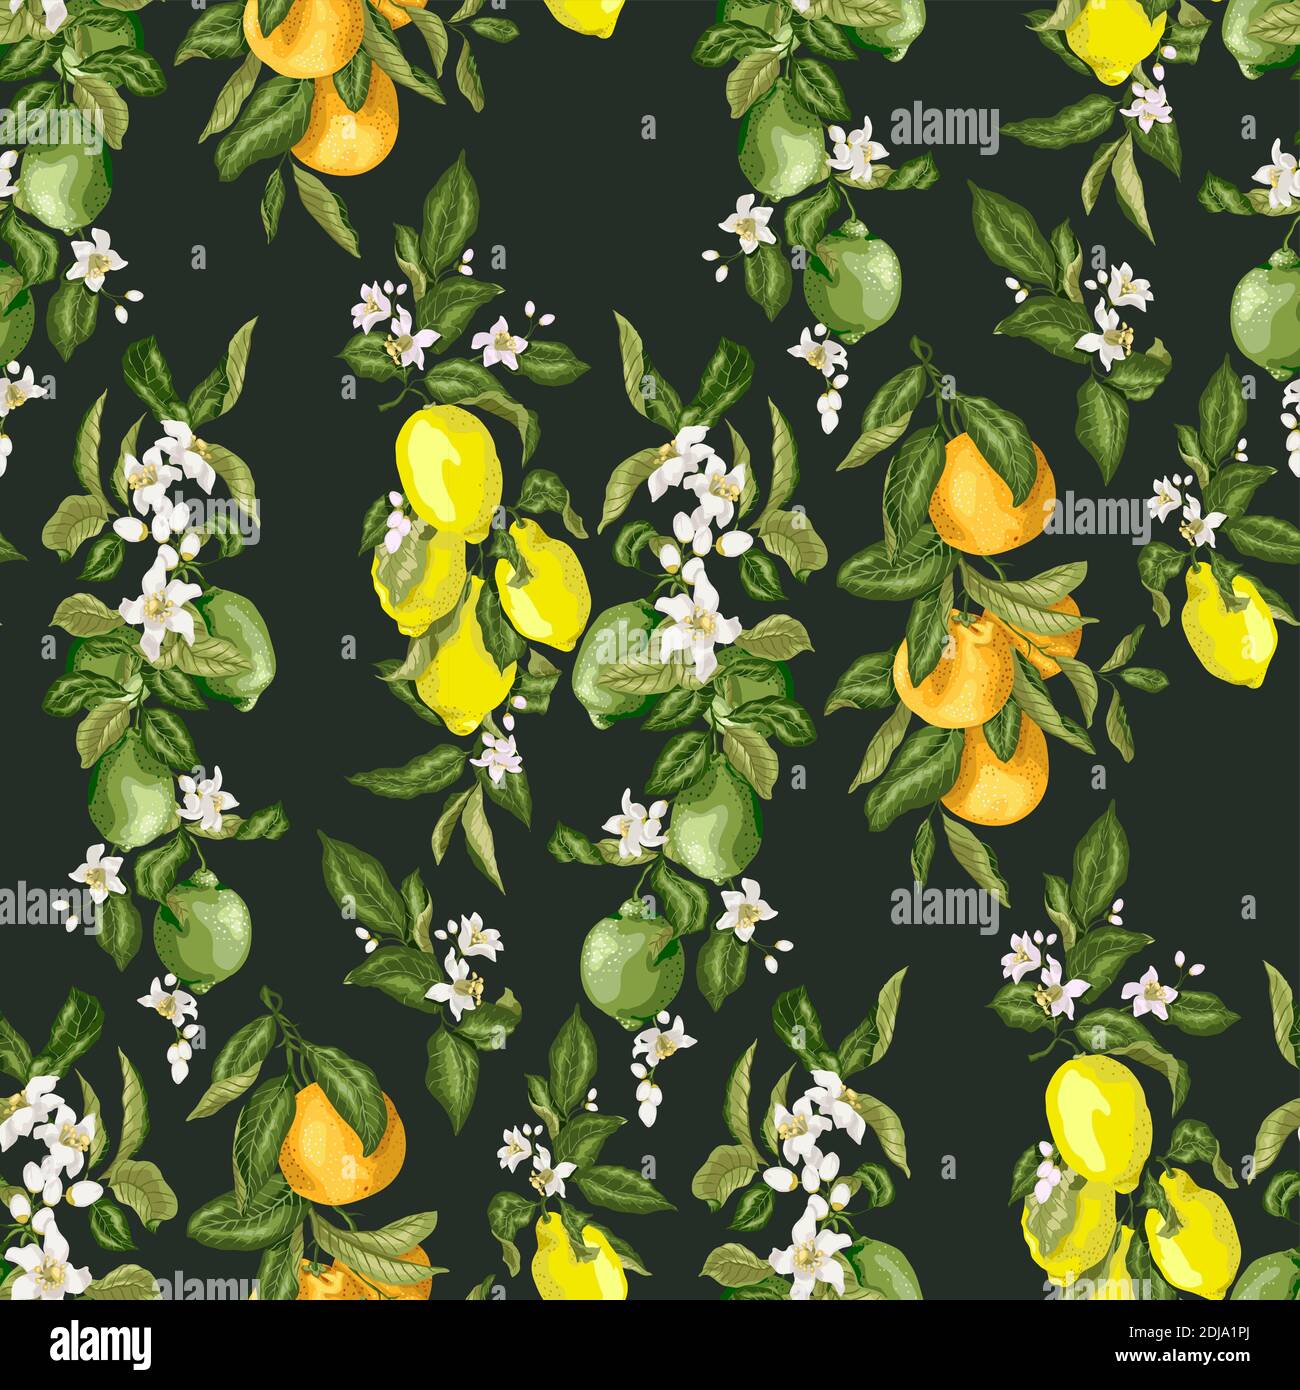 Vector high quality pattern with citurs elements in graphic illustration in realistic bright colors with fruits of lime, orange and lemon tree and cit Stock Vector